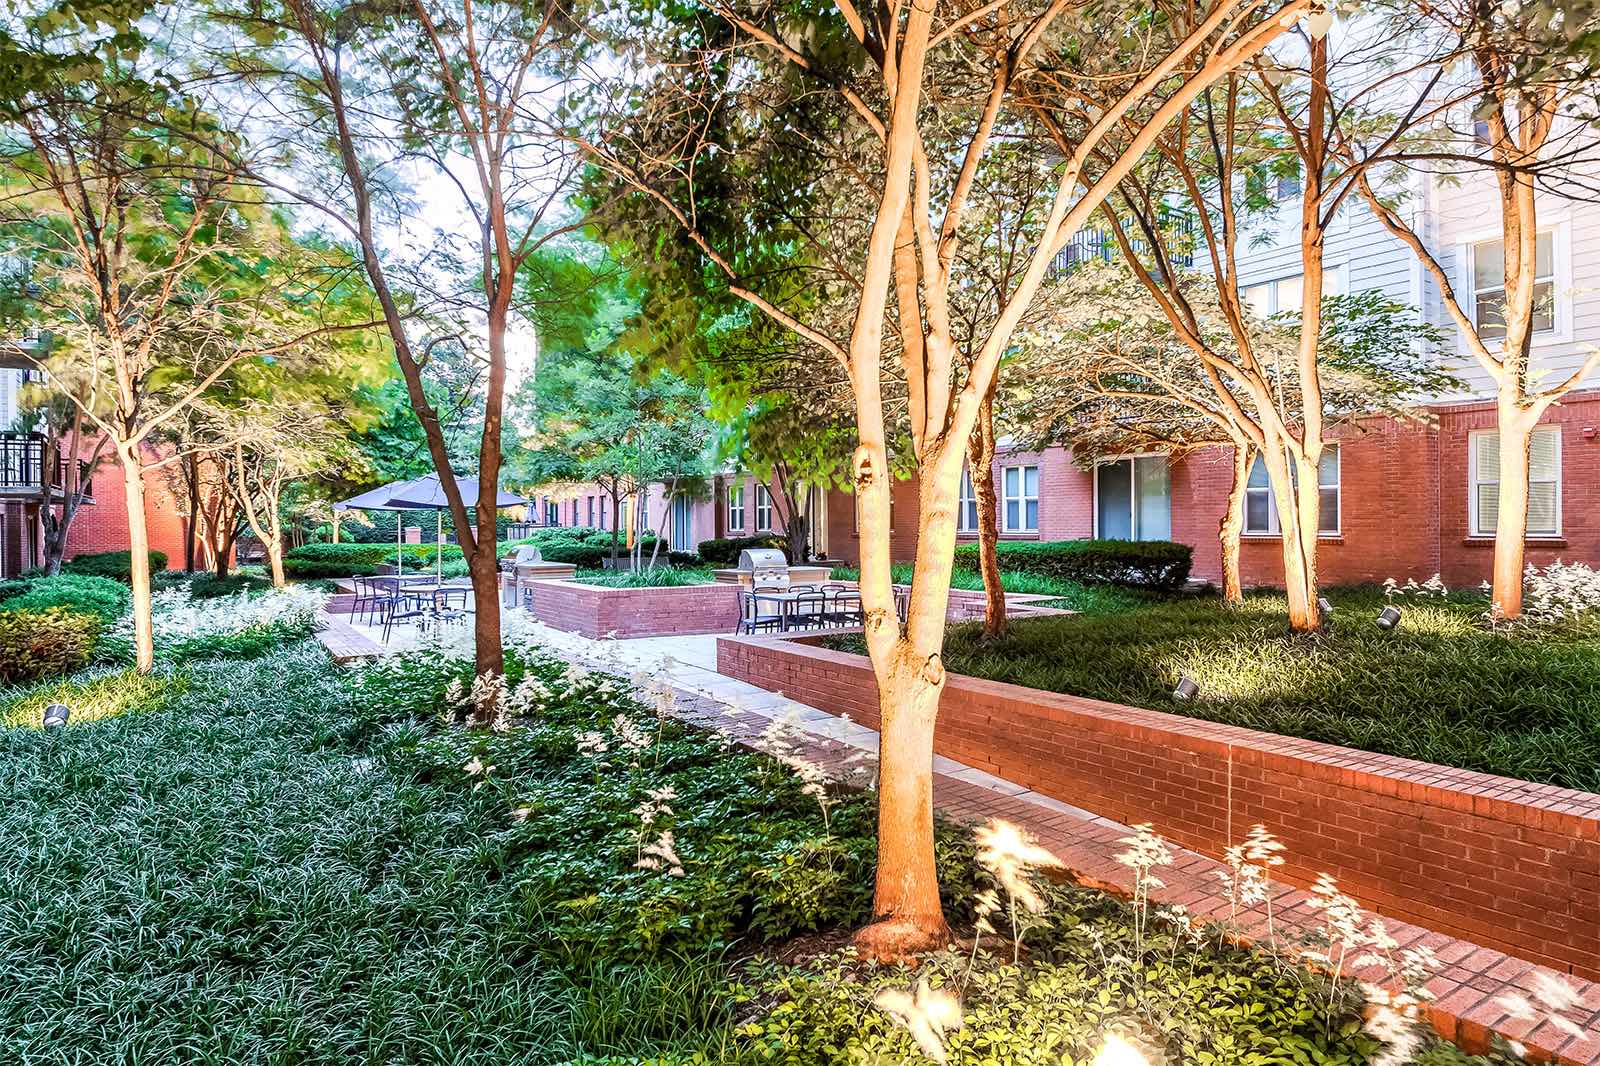 Private, tranquil courtyards for your own sanctuary.